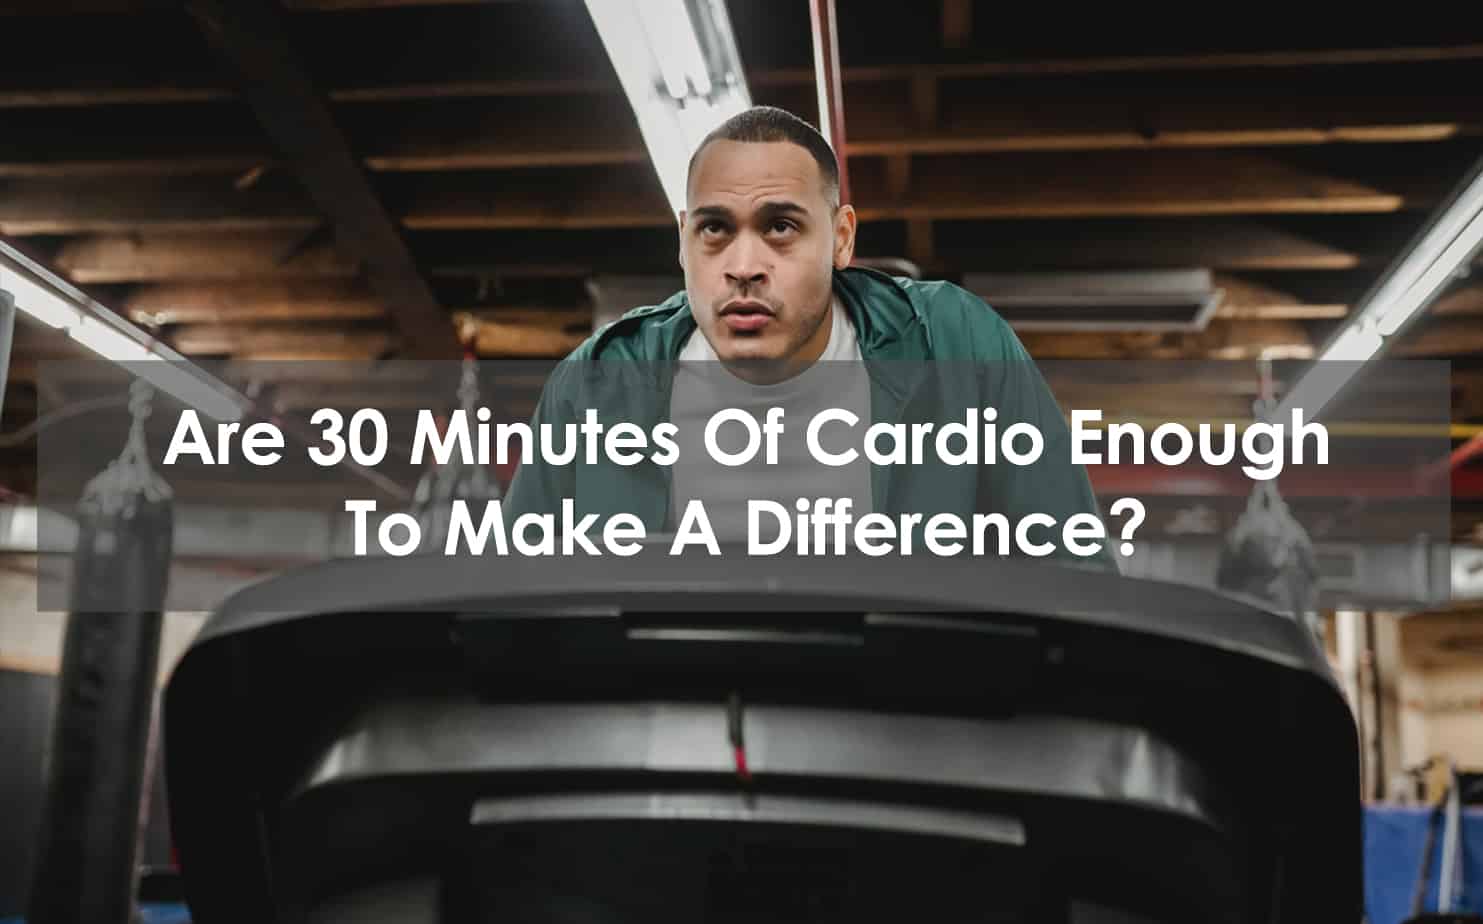 is 30 minutes enough cardio?